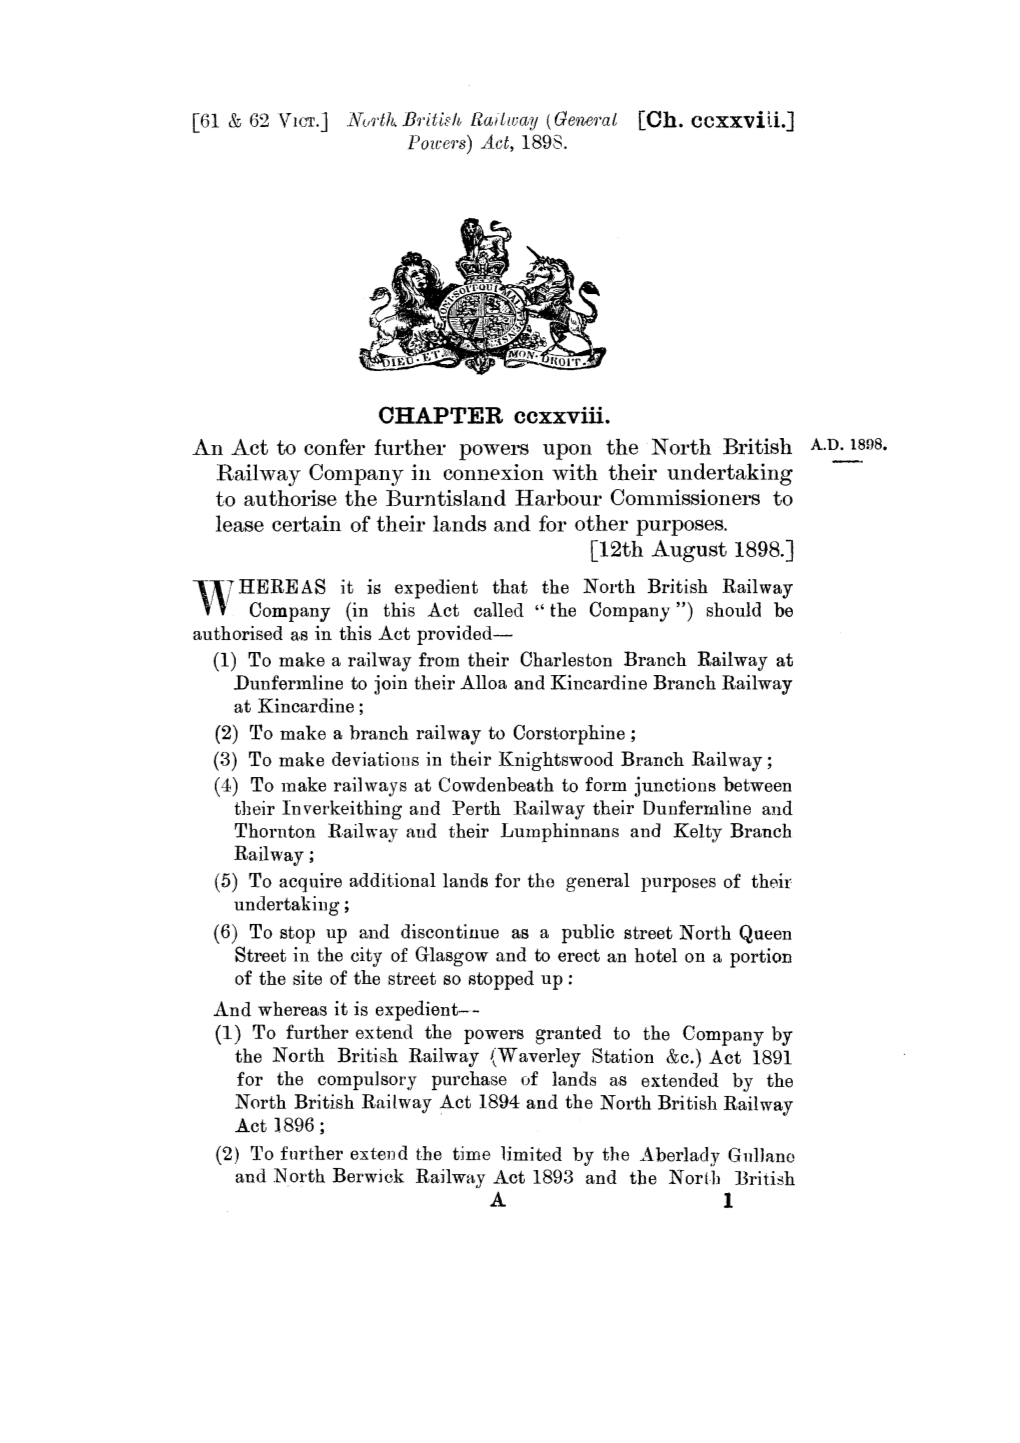 CHAPTER Ccxxviii. an Act to Confer Further Powers Upon the North Britisha.D.1898